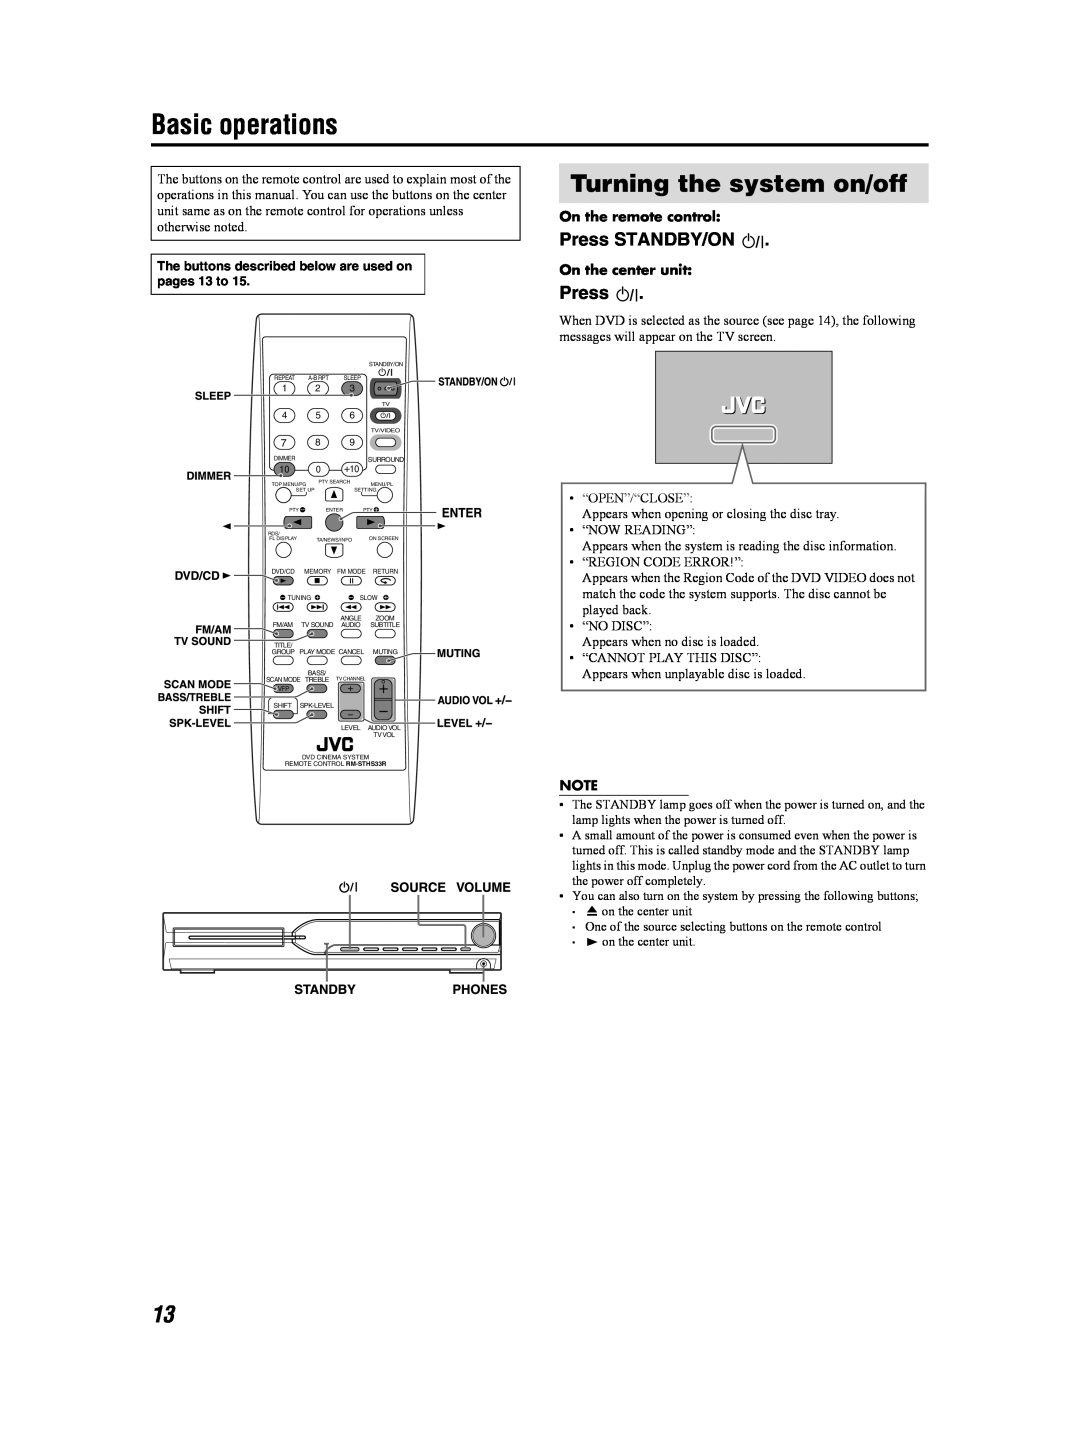 JVC GVT0155-001A Basic operations, Turning the system on/off, Press STANDBY/ON, On the remote control, On the center unit 